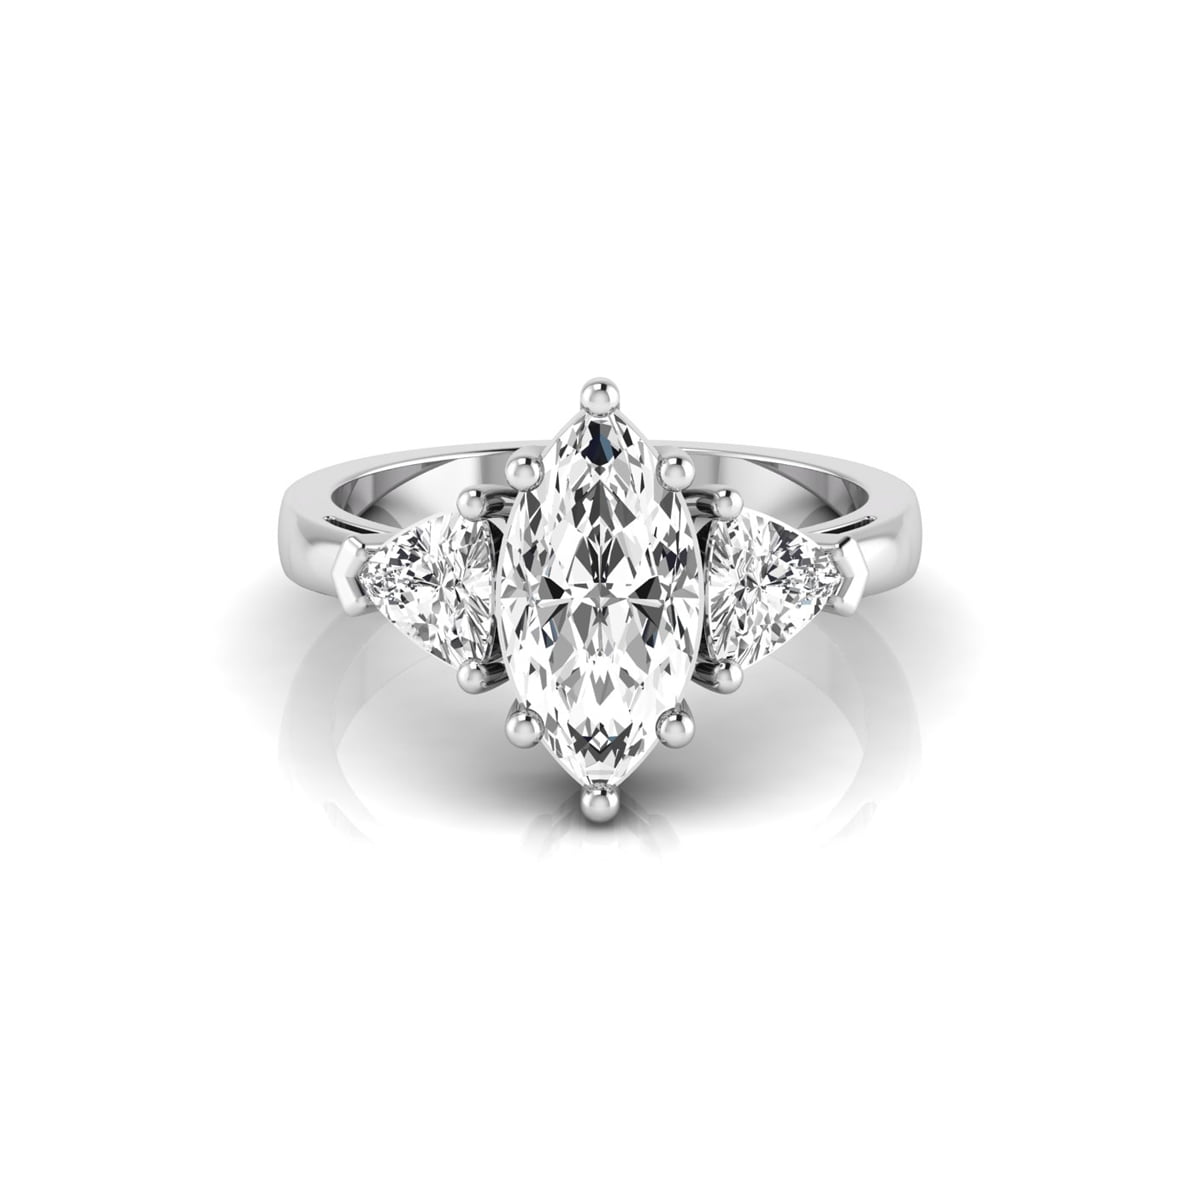 Marquise & Trillion Cut Moissanite Three Stone Engagement Ring For Women (2 1/3 TCW)